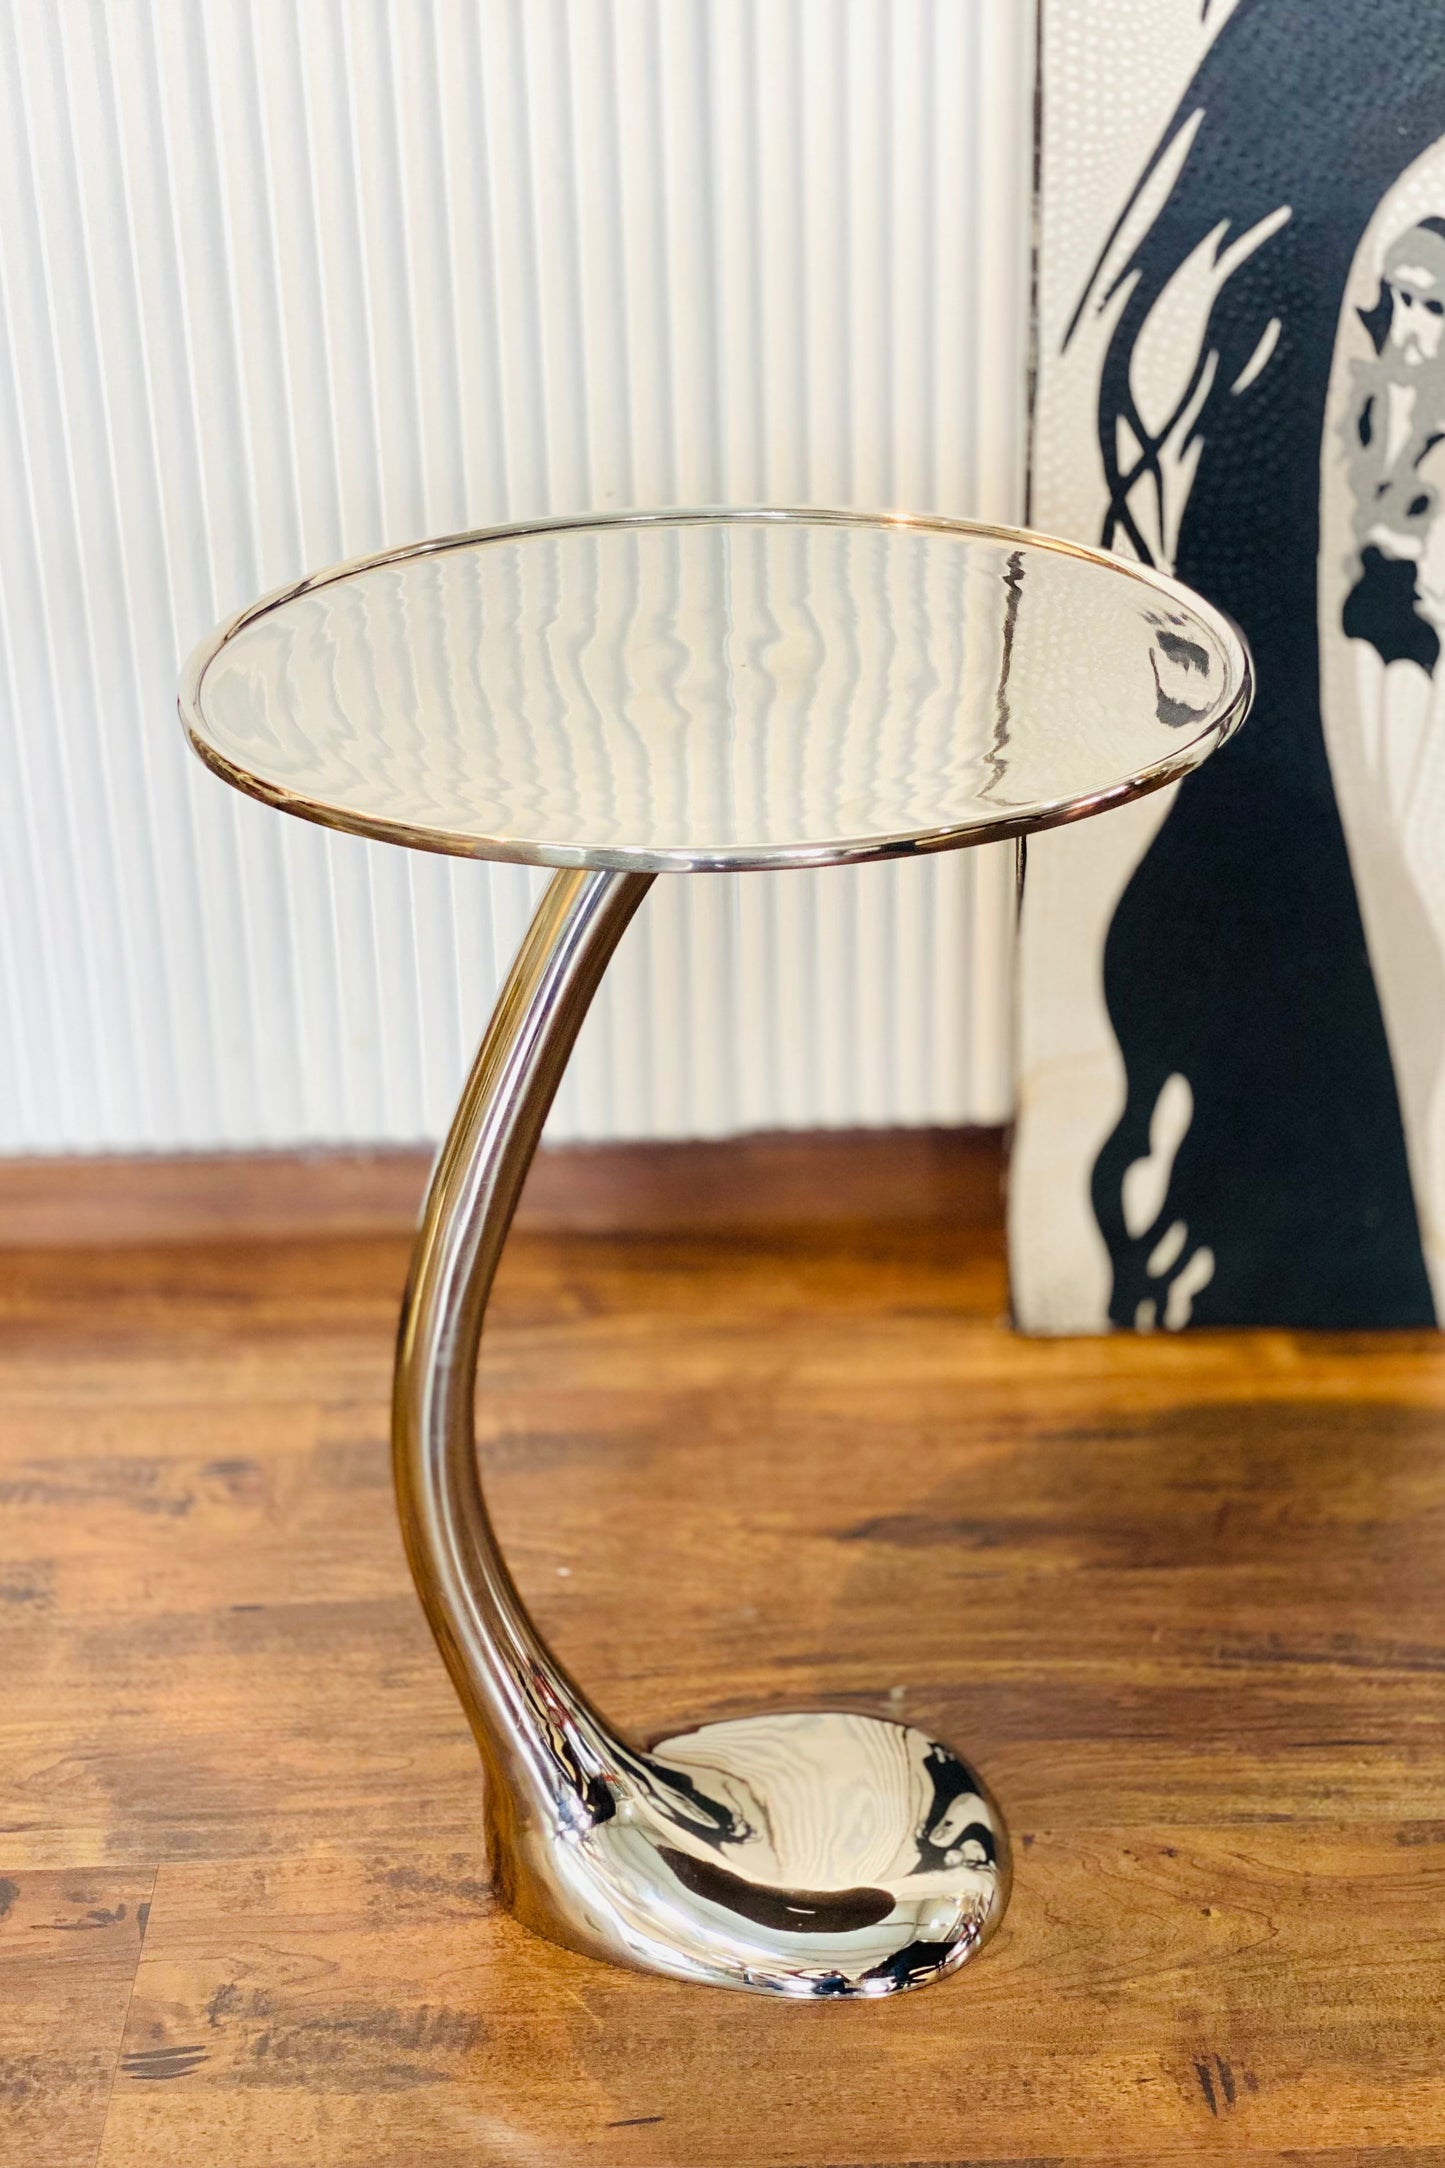 Artisinal Stainless Steel Circular End Table